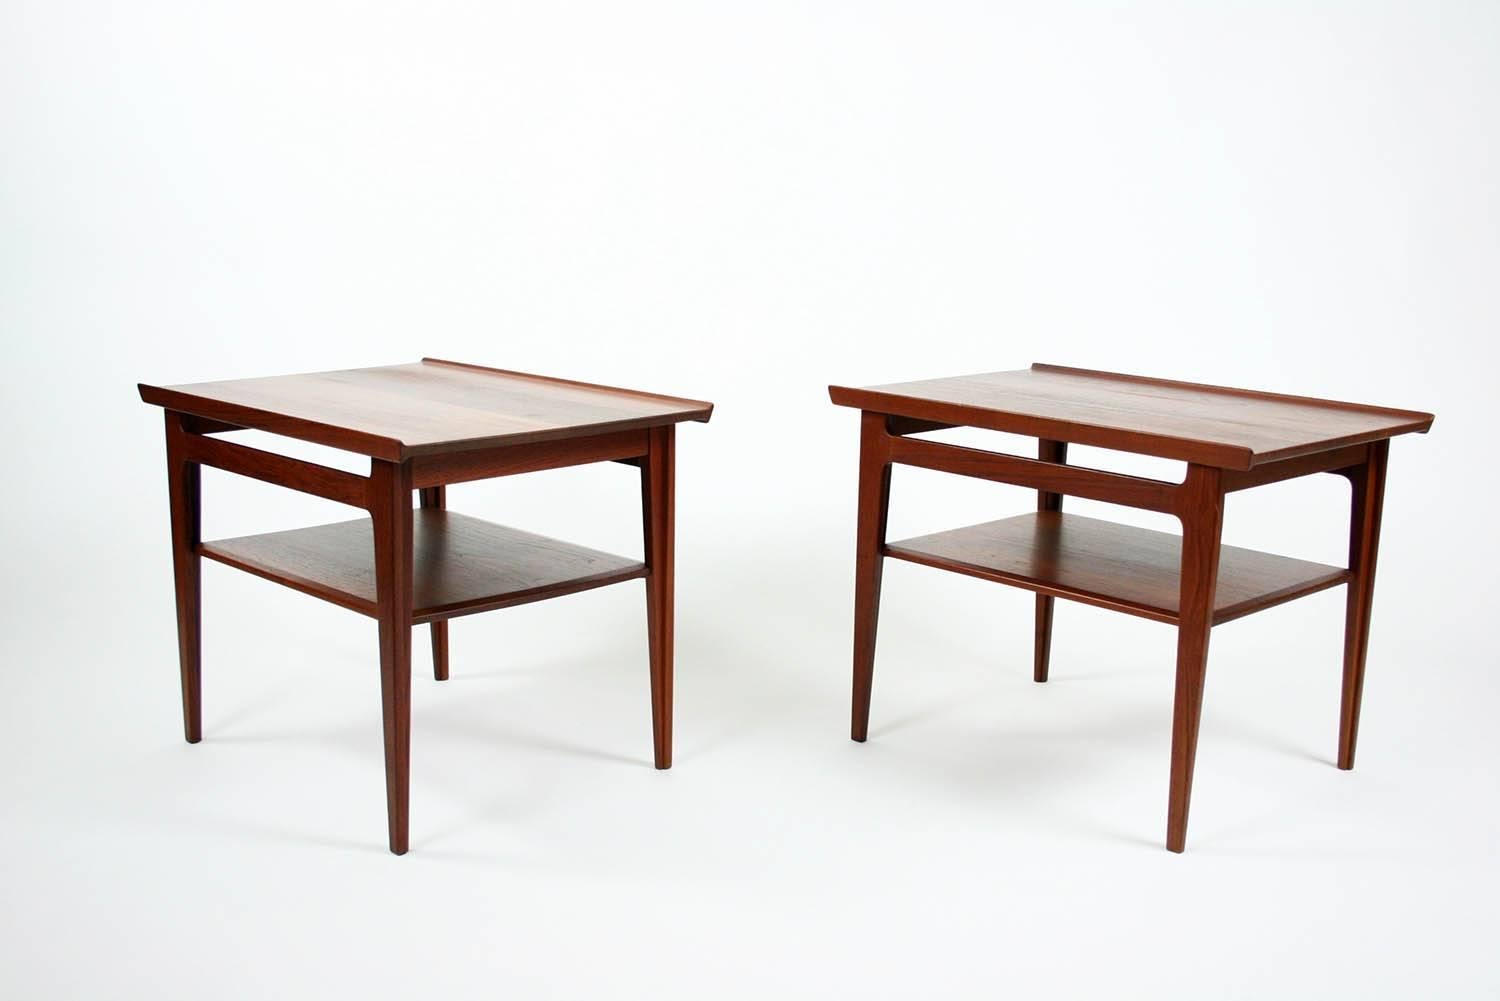 Pair of 500 series Danish teak tiered side tables by Finn Juhl for France and Son. Tables are rare solid teak. Sleek design, perfect Danish details and construction.